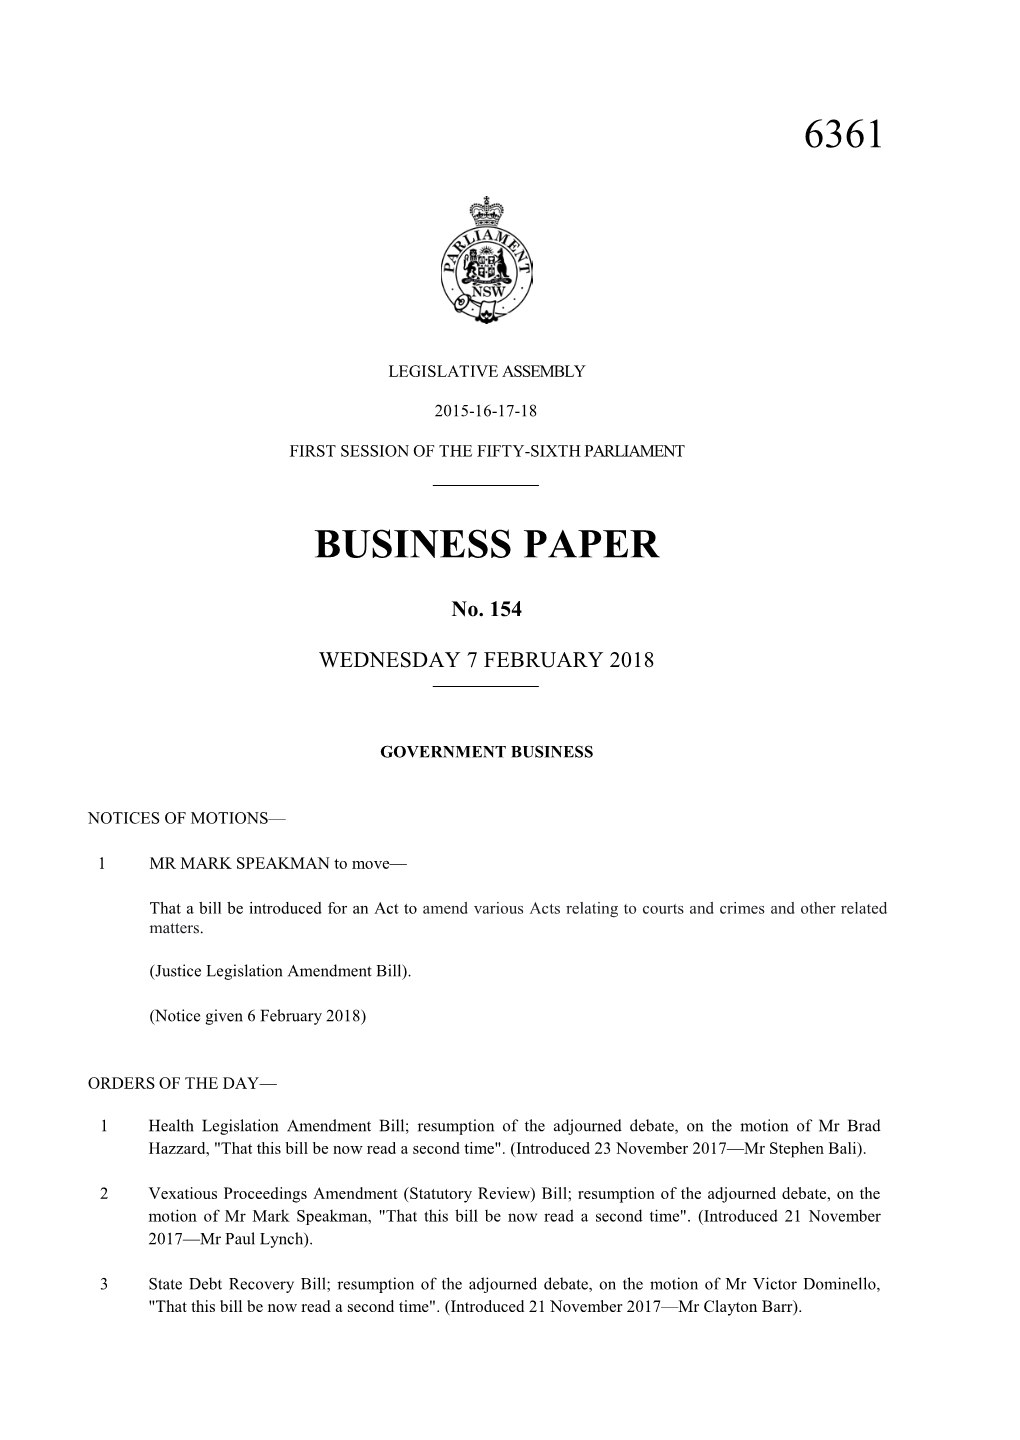 6361 Business Paper